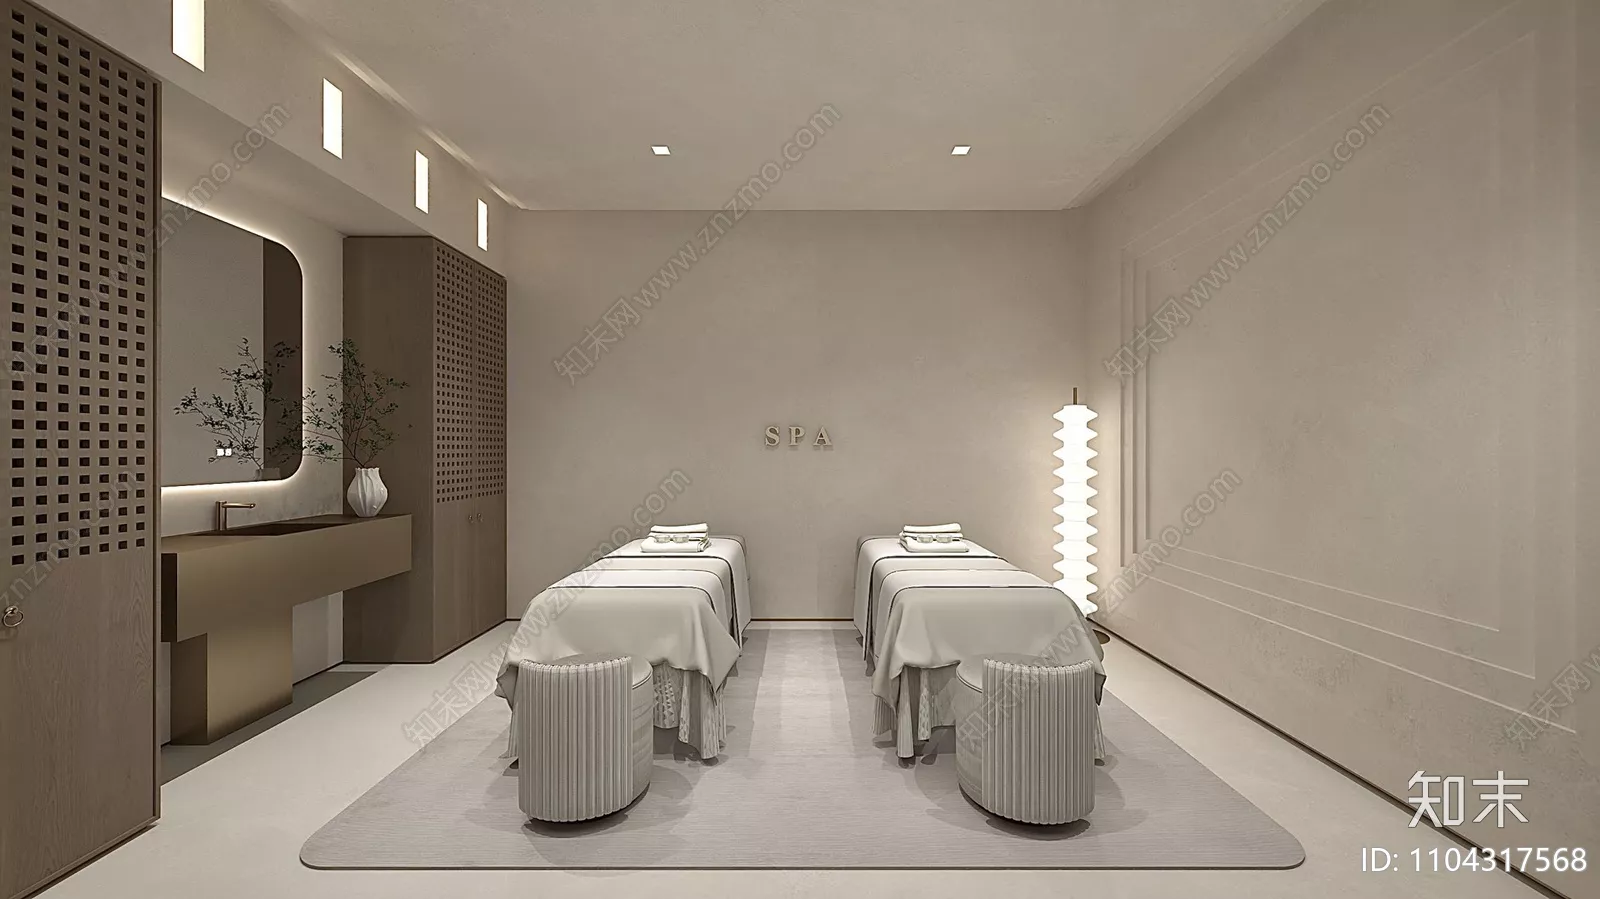 MODERN SPA AND BEAUTY - SKETCHUP 3D SCENE - VRAY OR ENSCAPE - ID14051